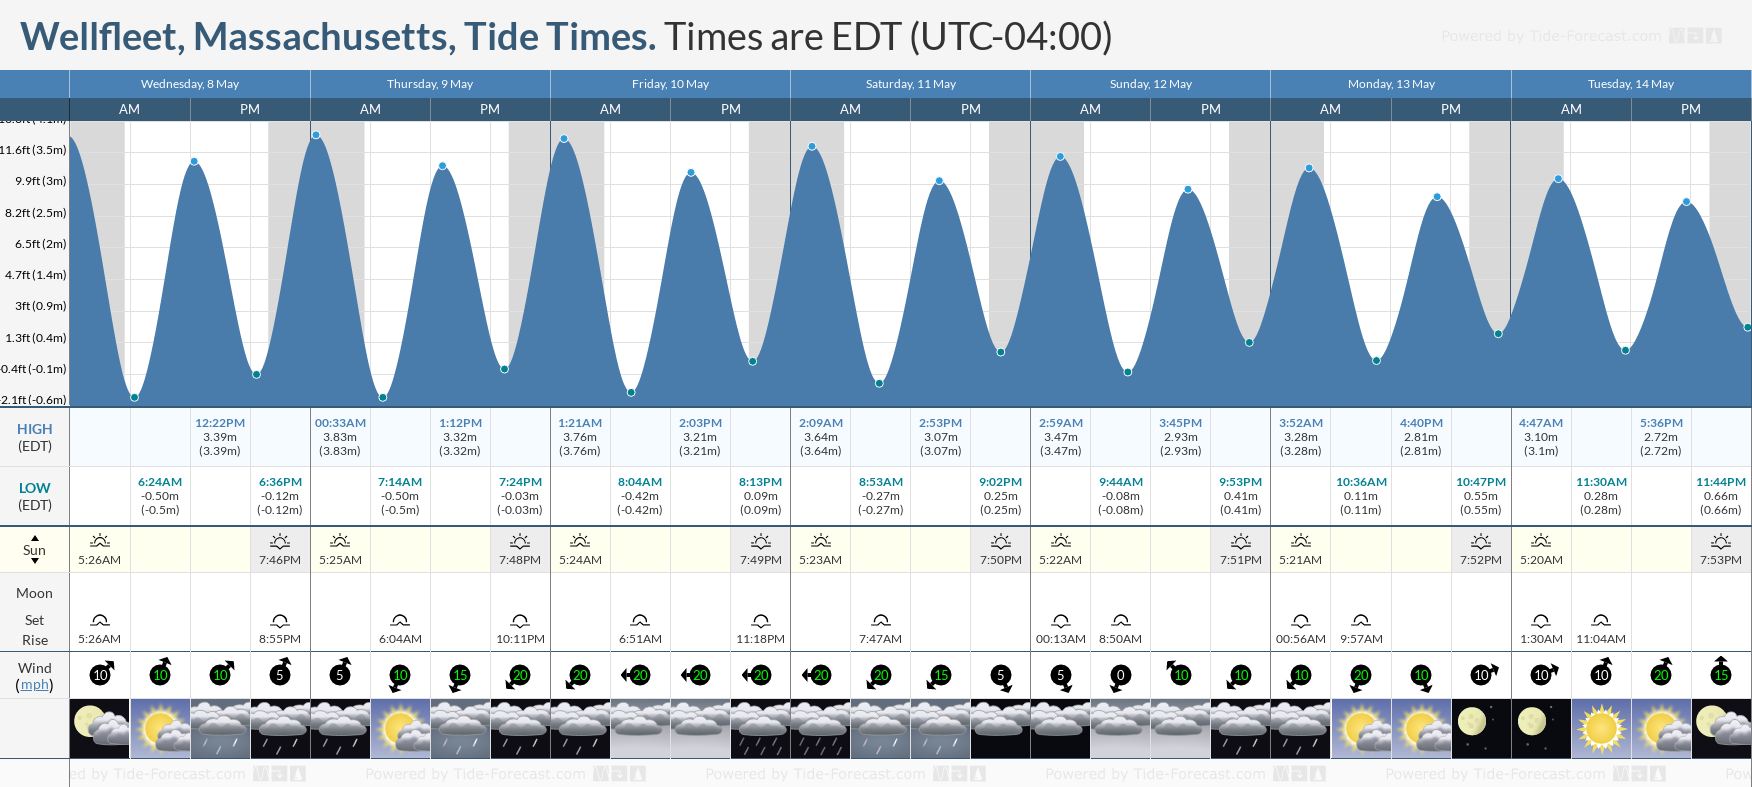 Wellfleet, Massachusetts Tide Chart including high and low tide tide times for the next 7 days